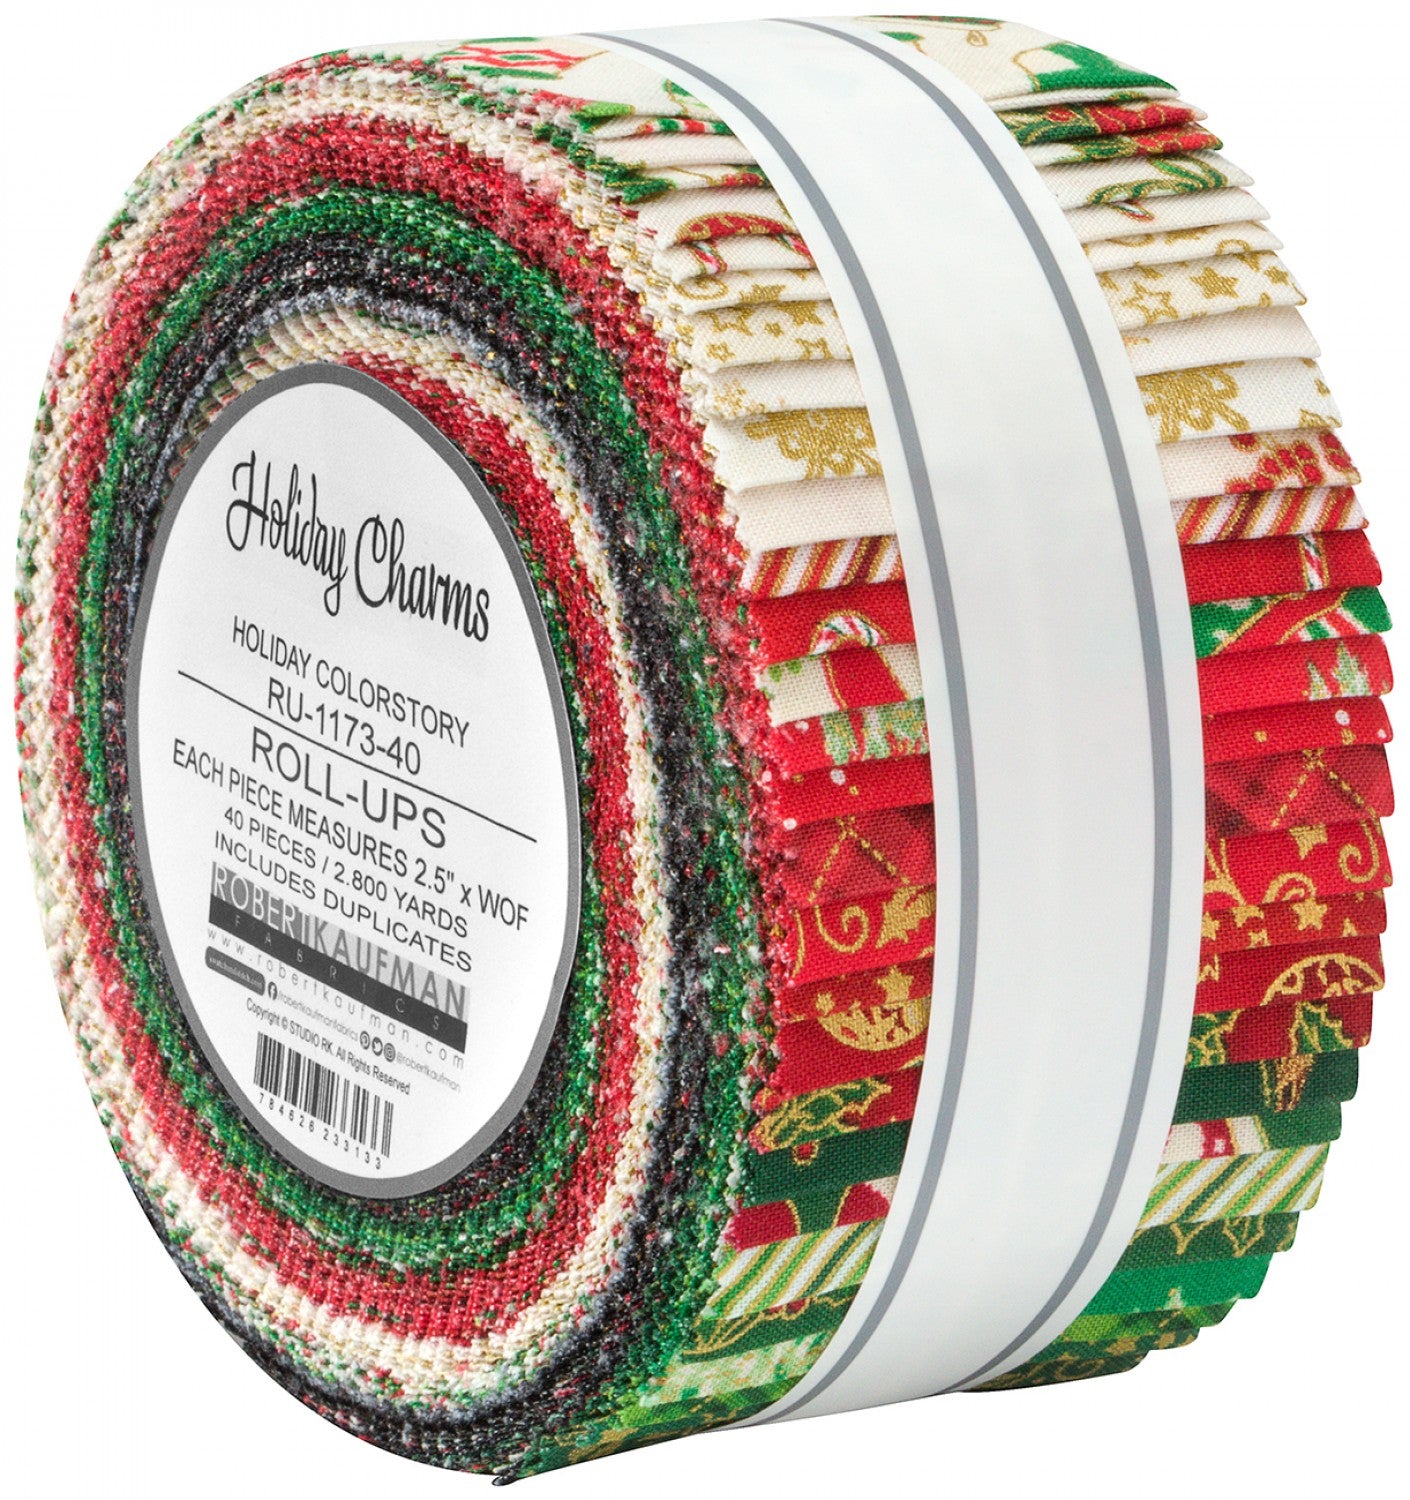 2.5" Roll-Up - Holiday Charms by Robert Kaufman Holiday Colorstory